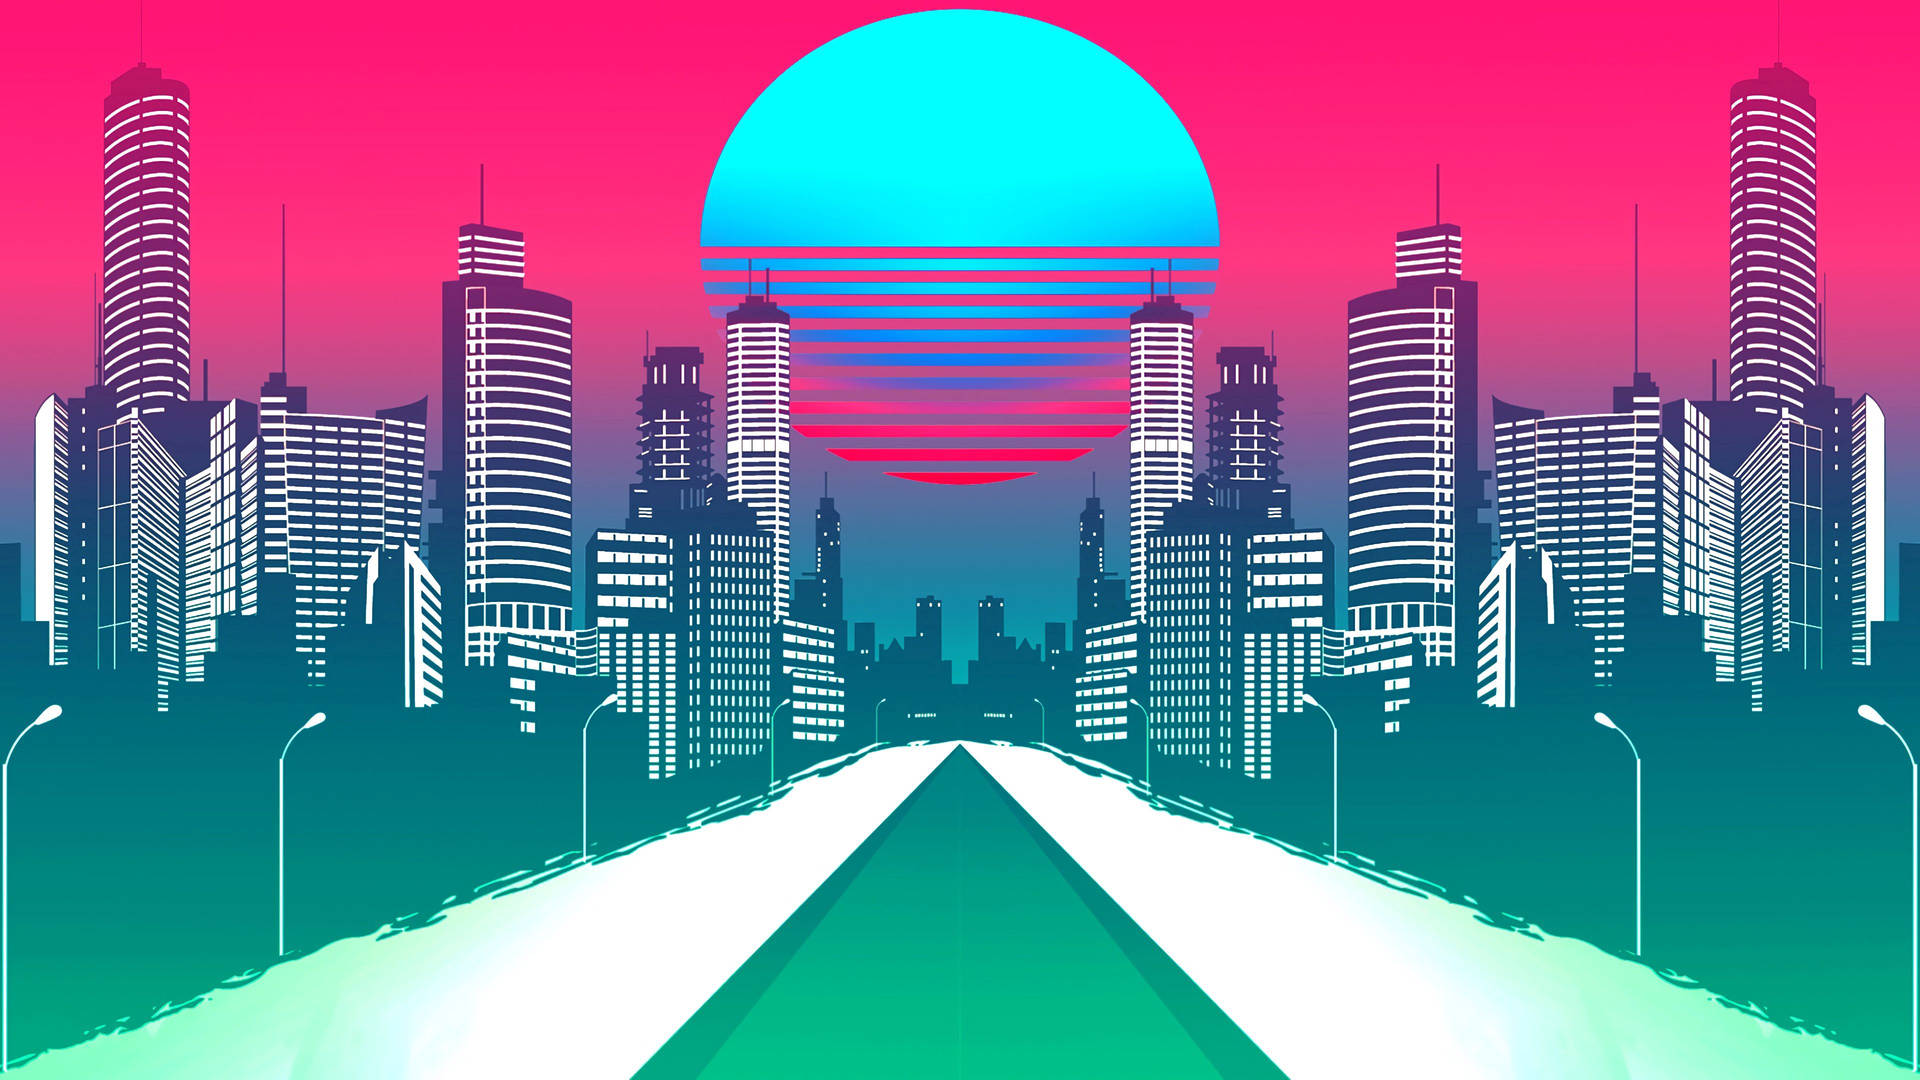 Top 999+ Retrowave Wallpapers Full HD, 4K✅Free to Use